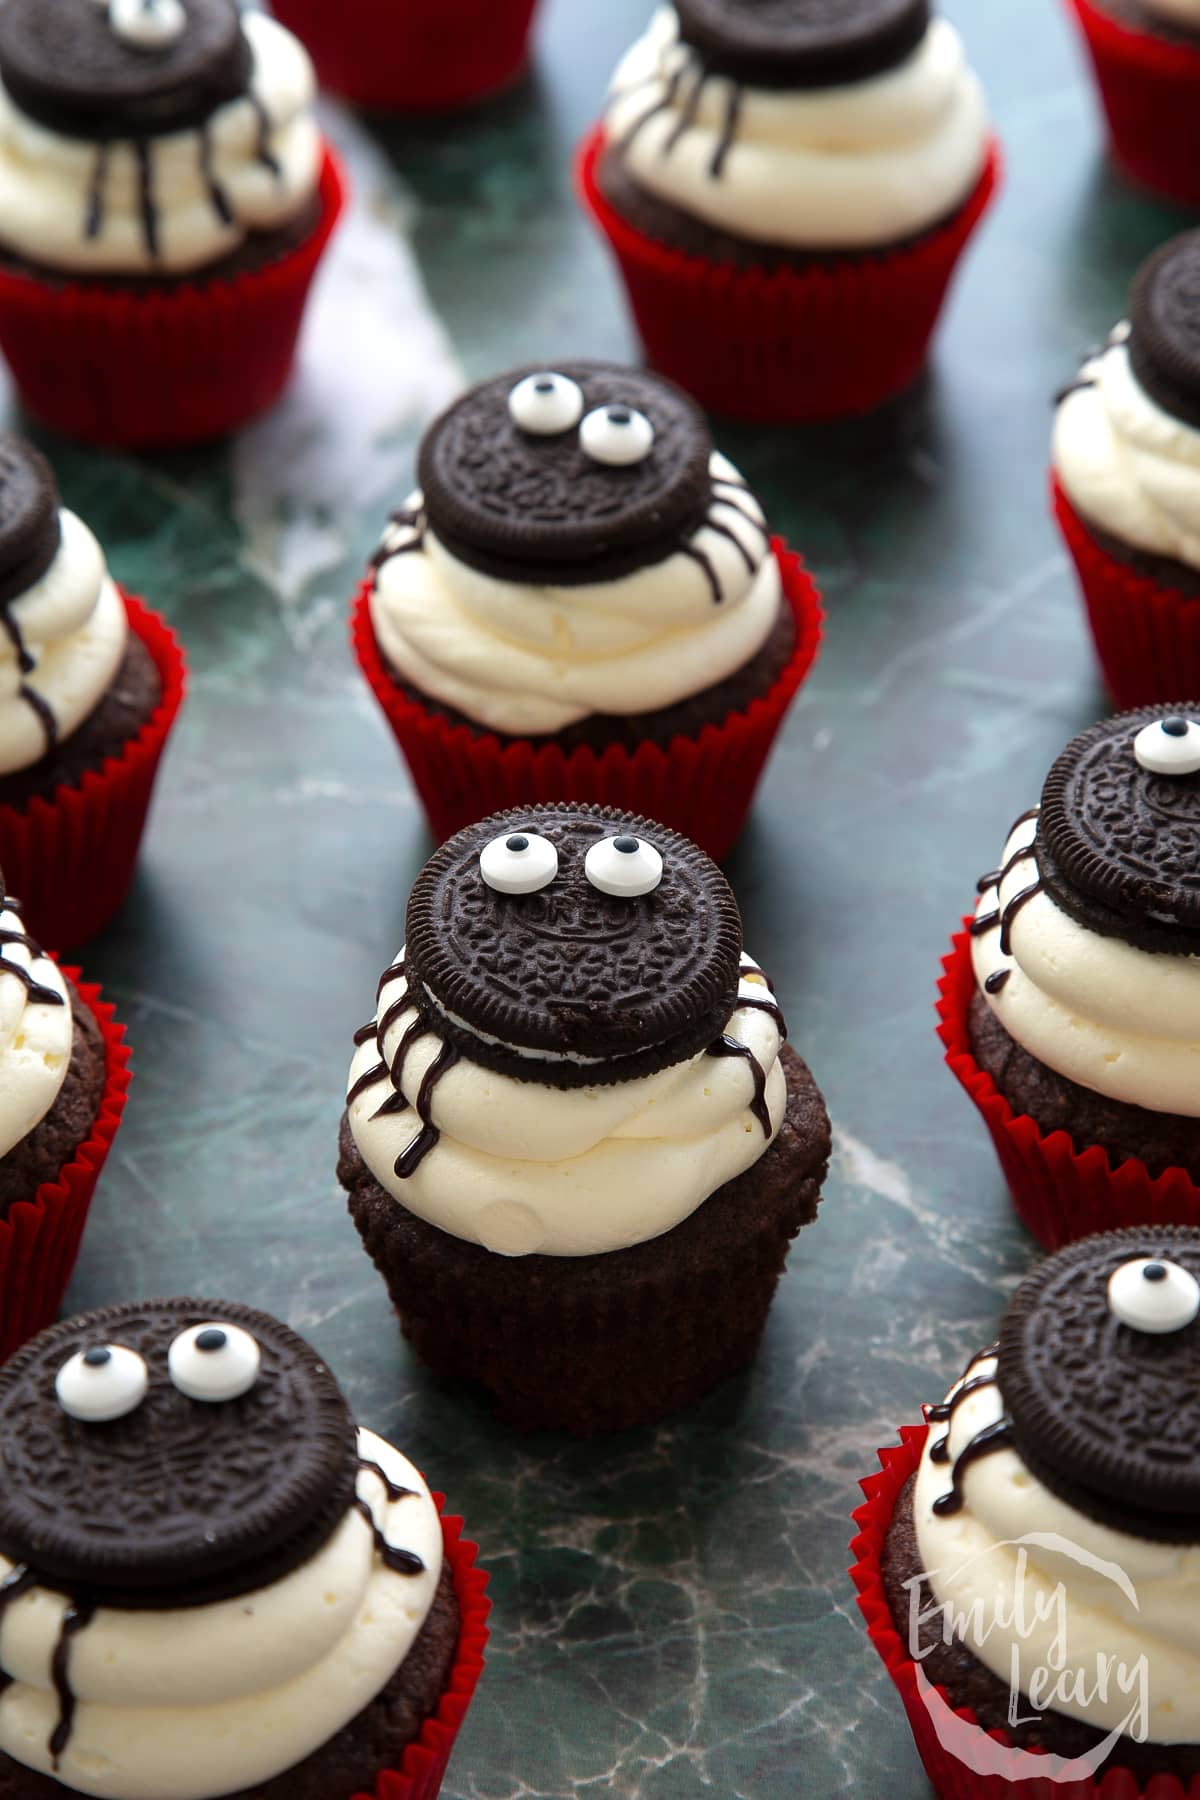 Vegan Halloween cupcakes, decorated with Oreos and candy eyes to look like spiders. One is unwrapped.